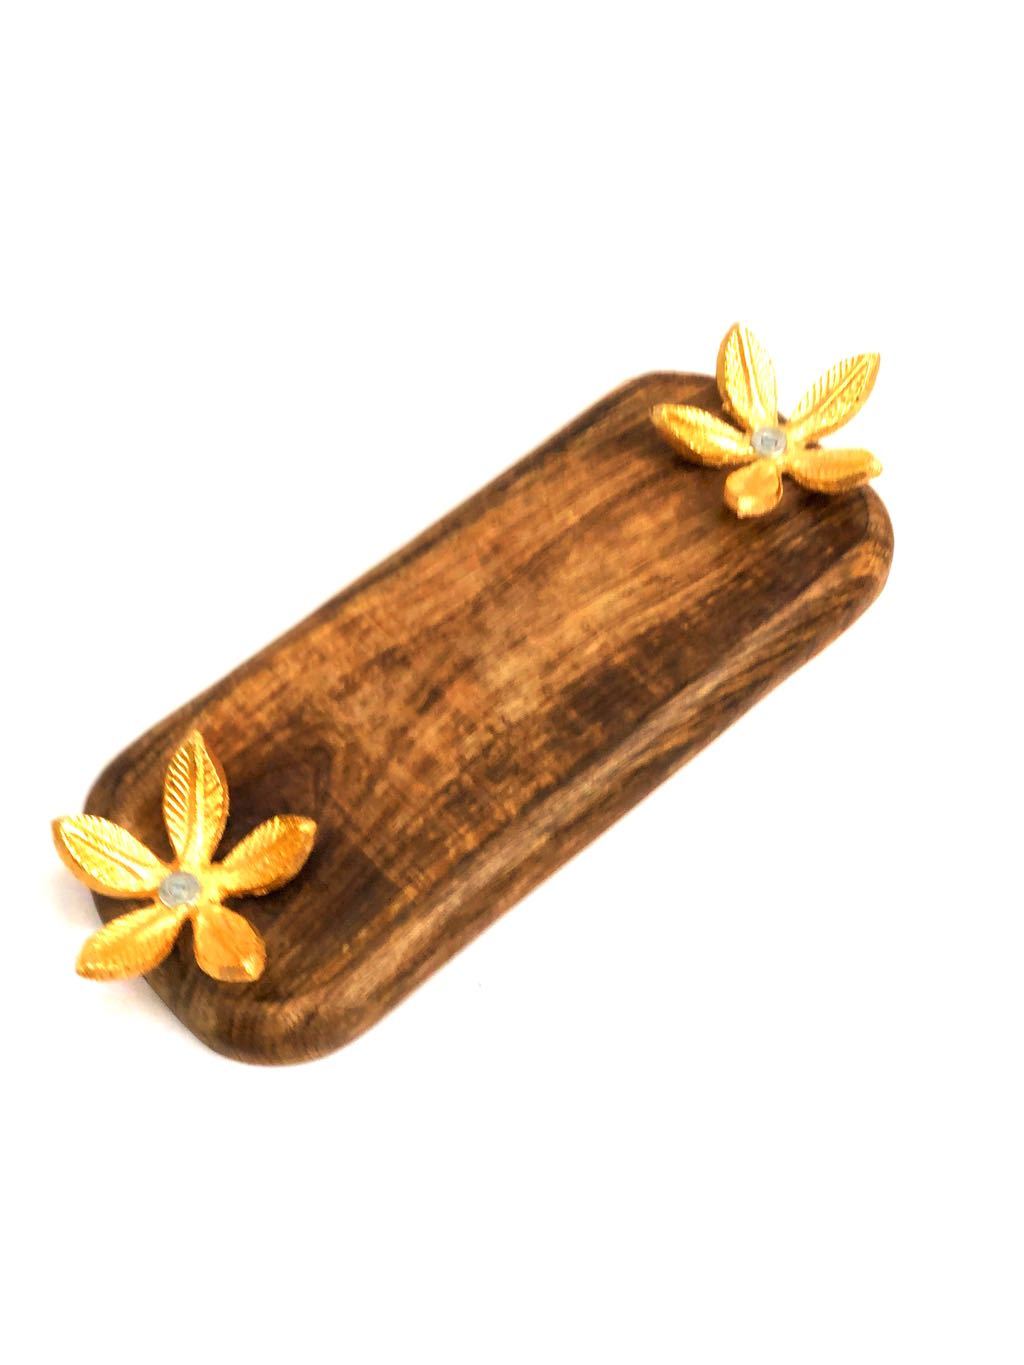 Wooden Platter With Metal Flower Petals Stand For Home Utility Tamrapatra